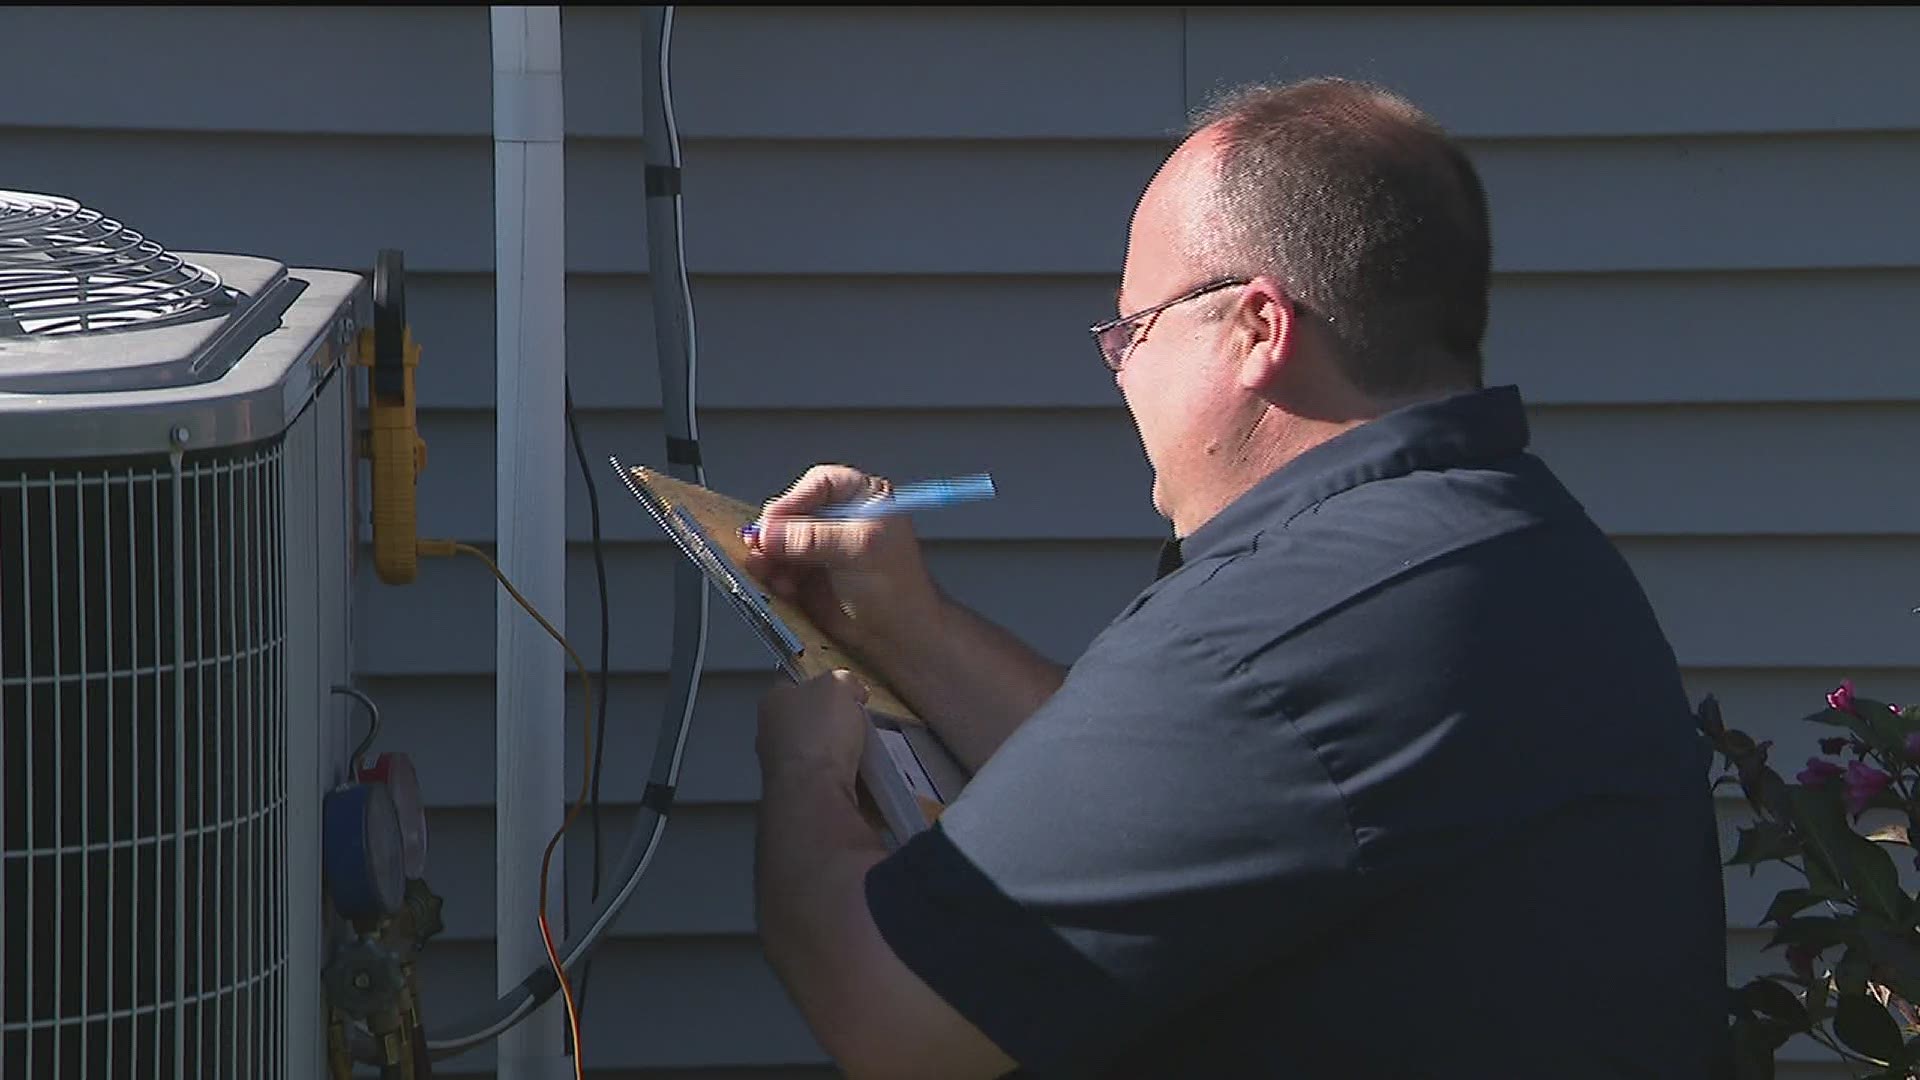 Service technicians with Local 91 Sheet Metal Workers Union make house calls and offer tips